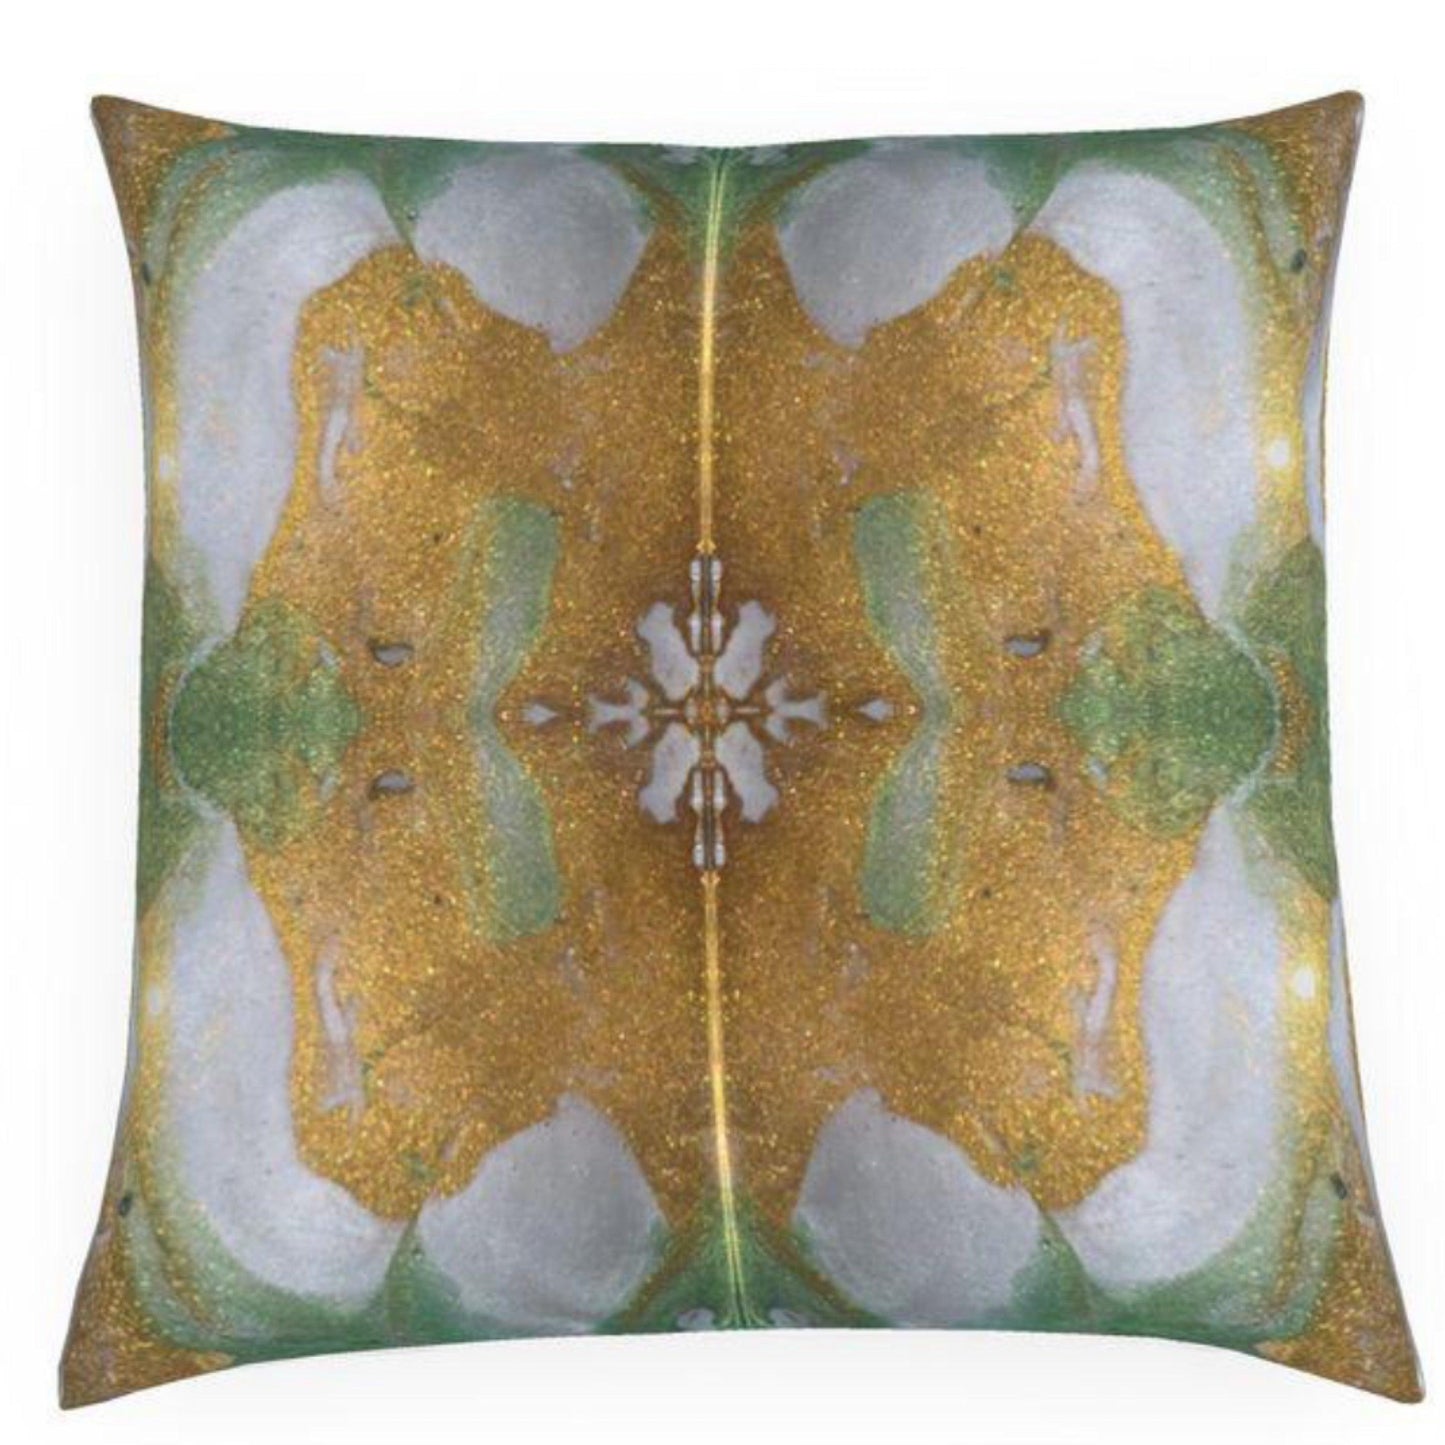 Gilt Gold and Pistachio Luxury Decorative Throw Pillow 20" x 20" - The White Barn Antiques